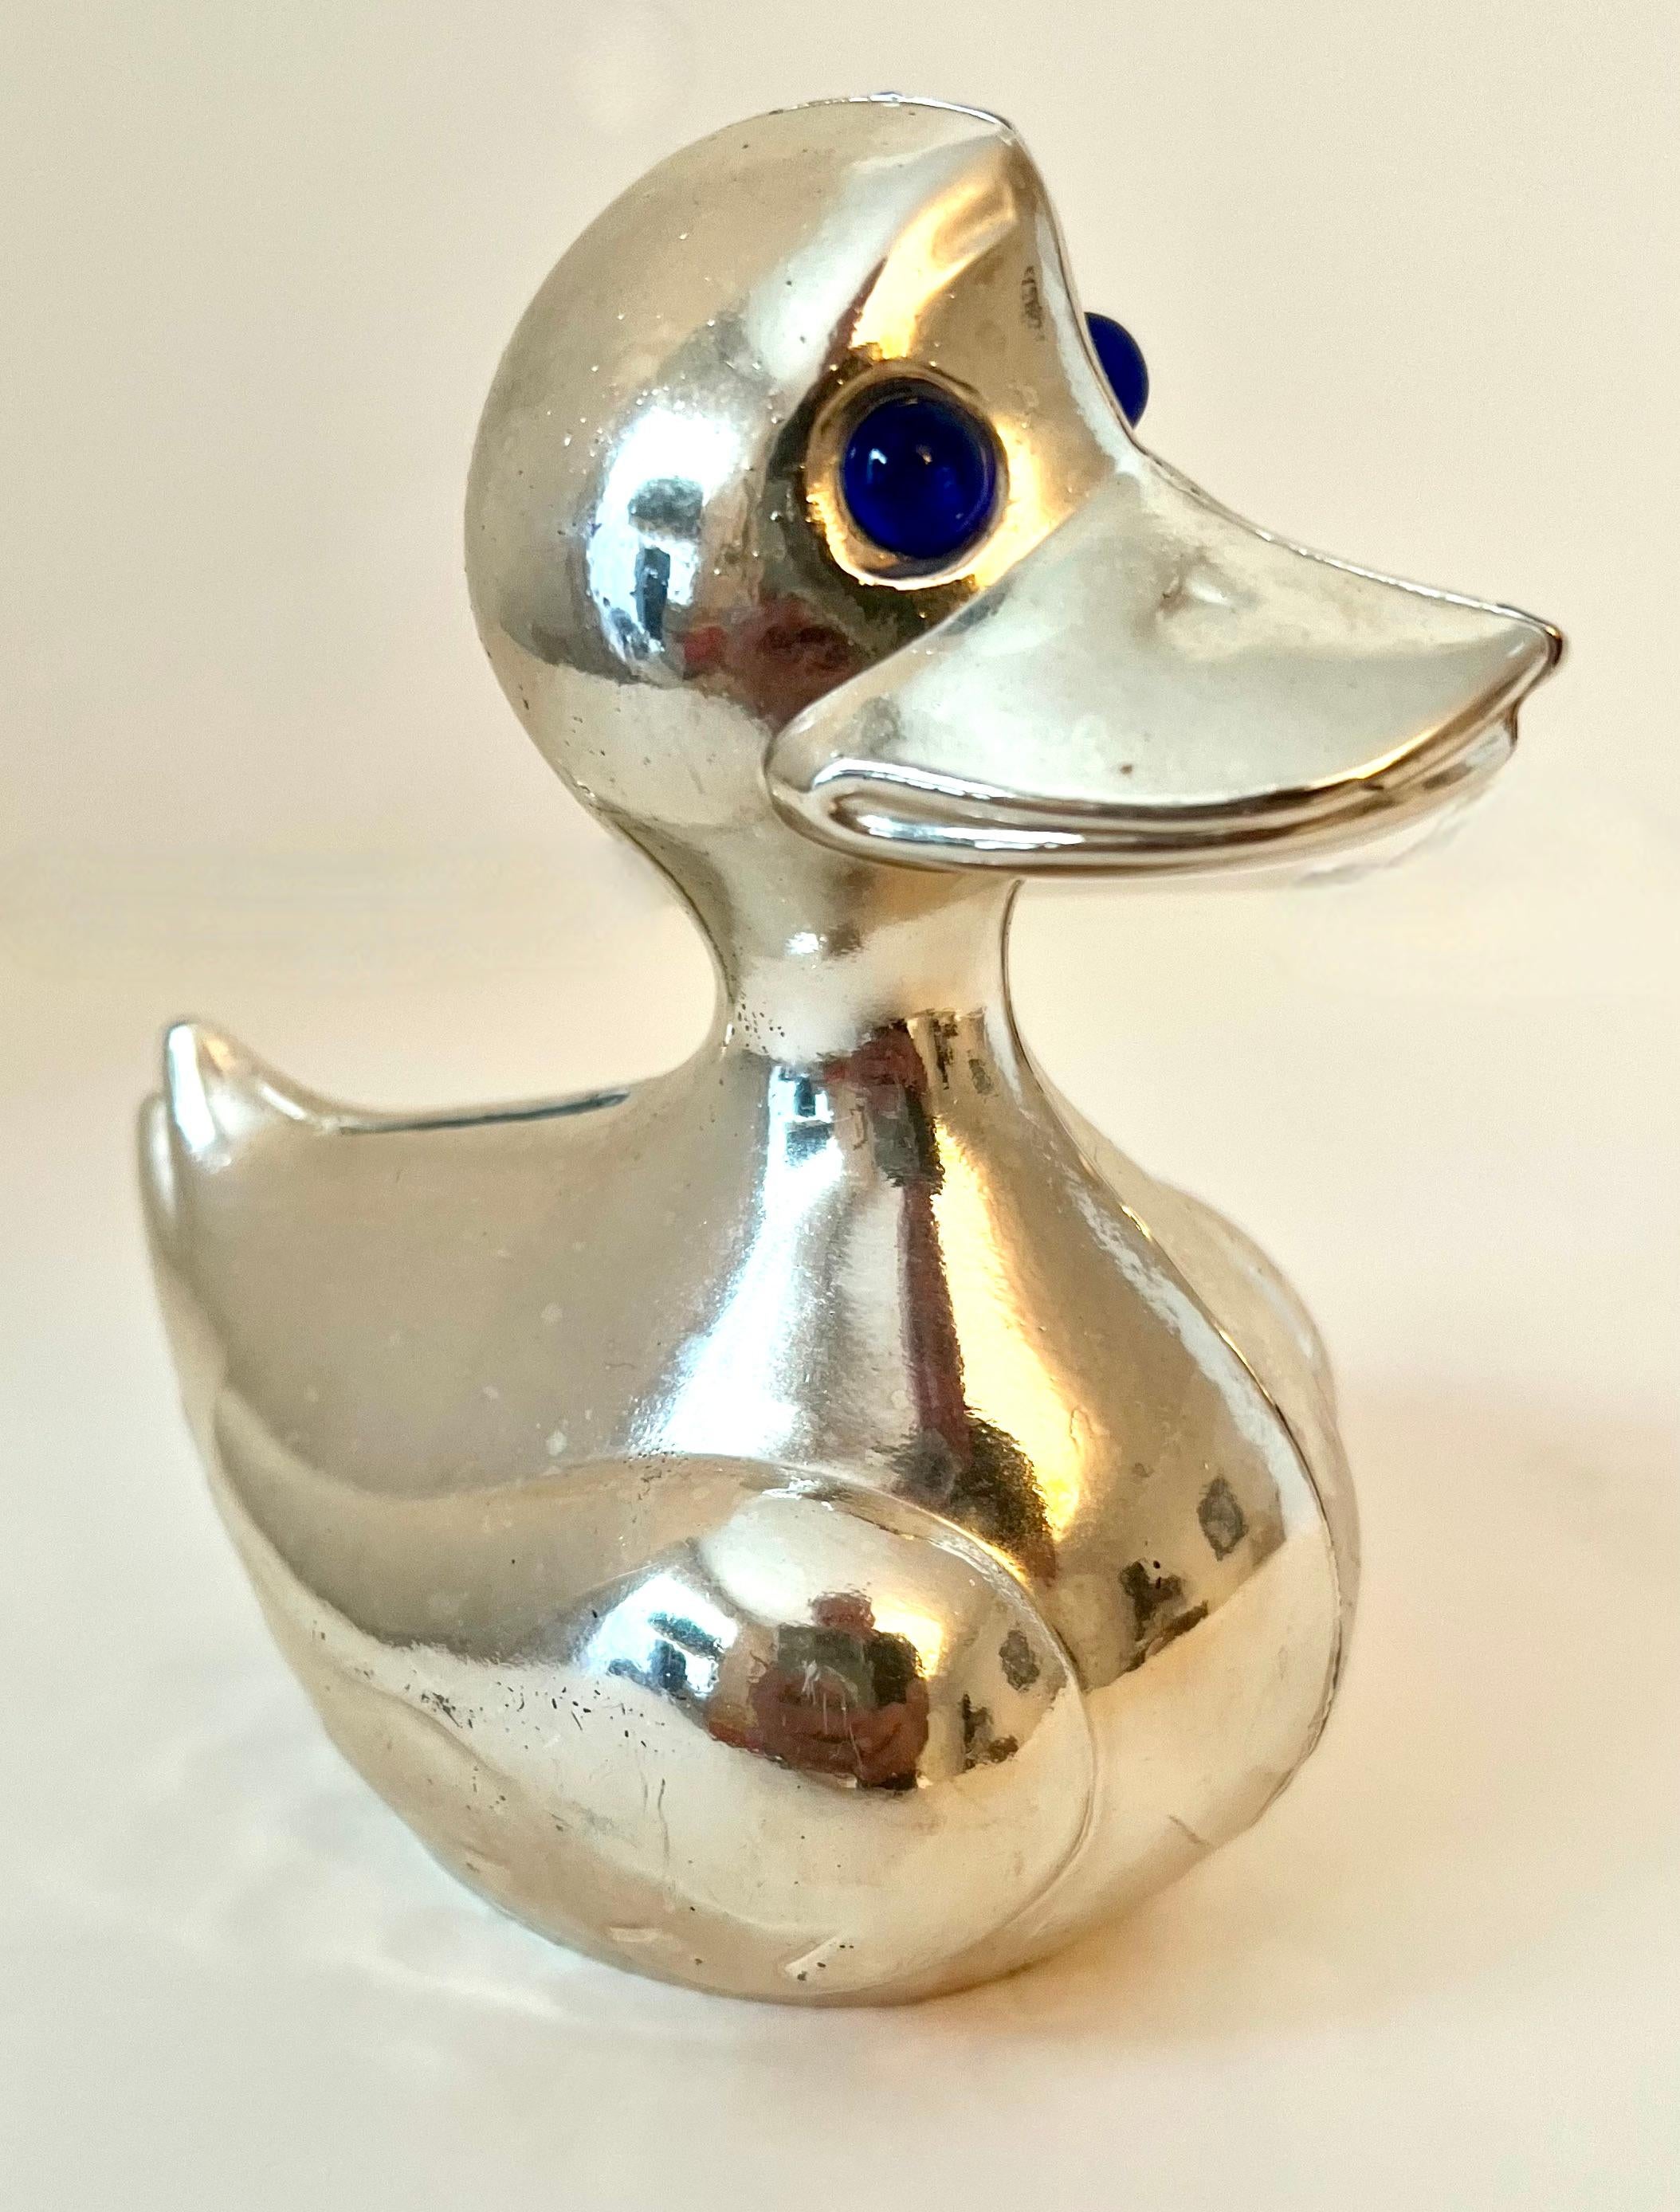 a vintage silver tone bank in the shape of a duck.  The piece is very cute with blue glass eyes

The perfect Baby Gift or decorative piece for a Childs room or whimsical stated room,